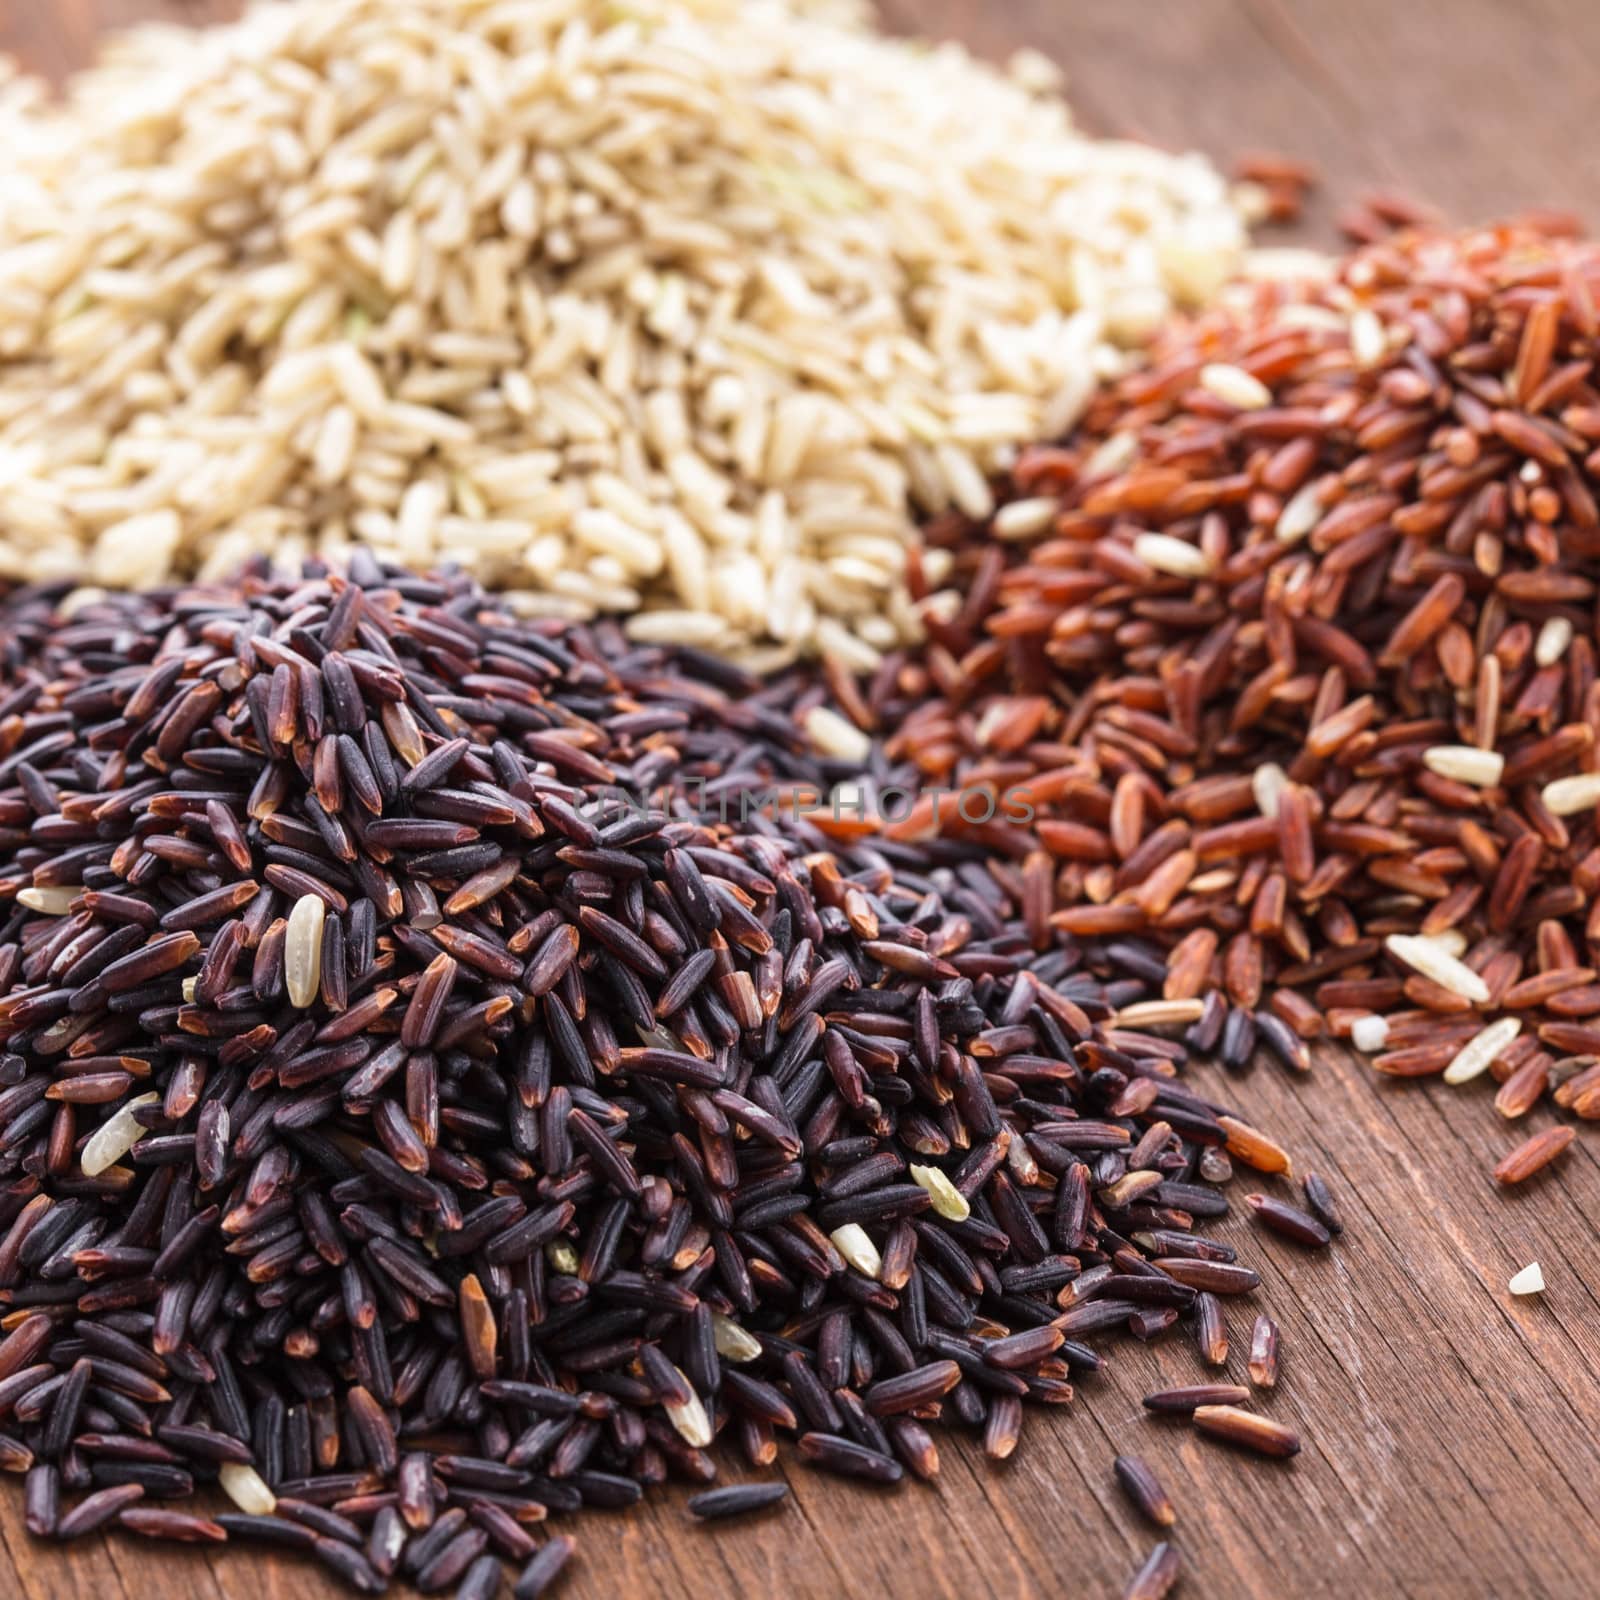 Healthy rice variety: brown, red and wild black